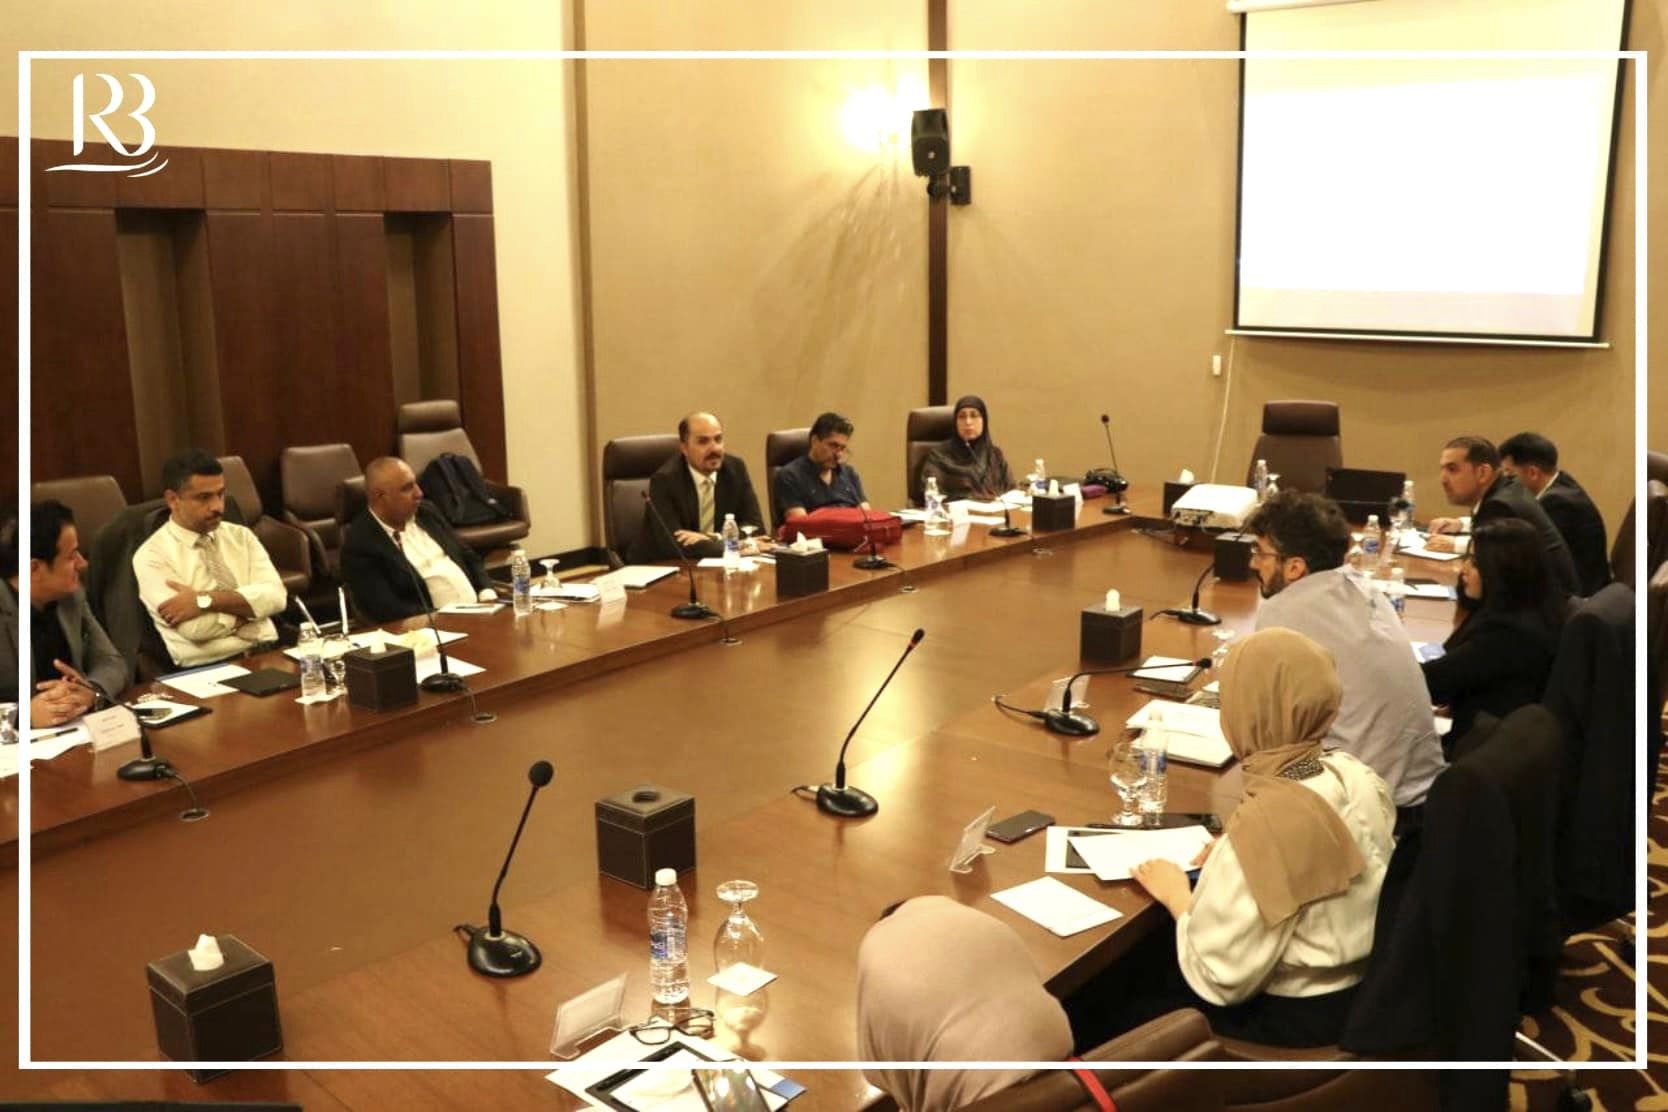 Rewaq Baghdad Center for Public Policy held its second dialogue session to talk about the outcomes of the first dialogue session